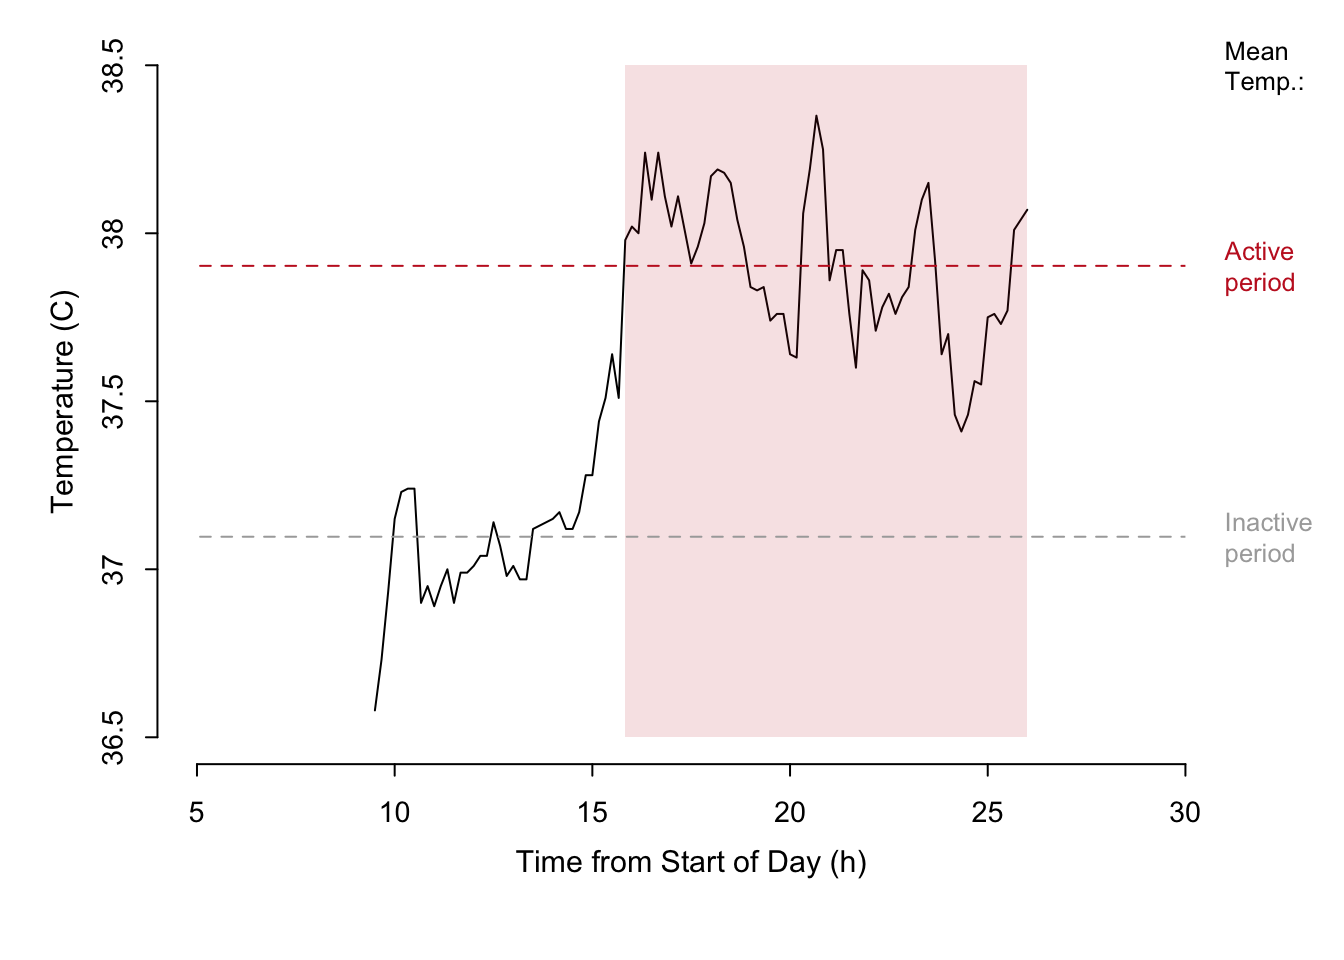 A time series of temperature measured during the course of a day for a single beaver. The active state of the beaver is represented by the shaded area.